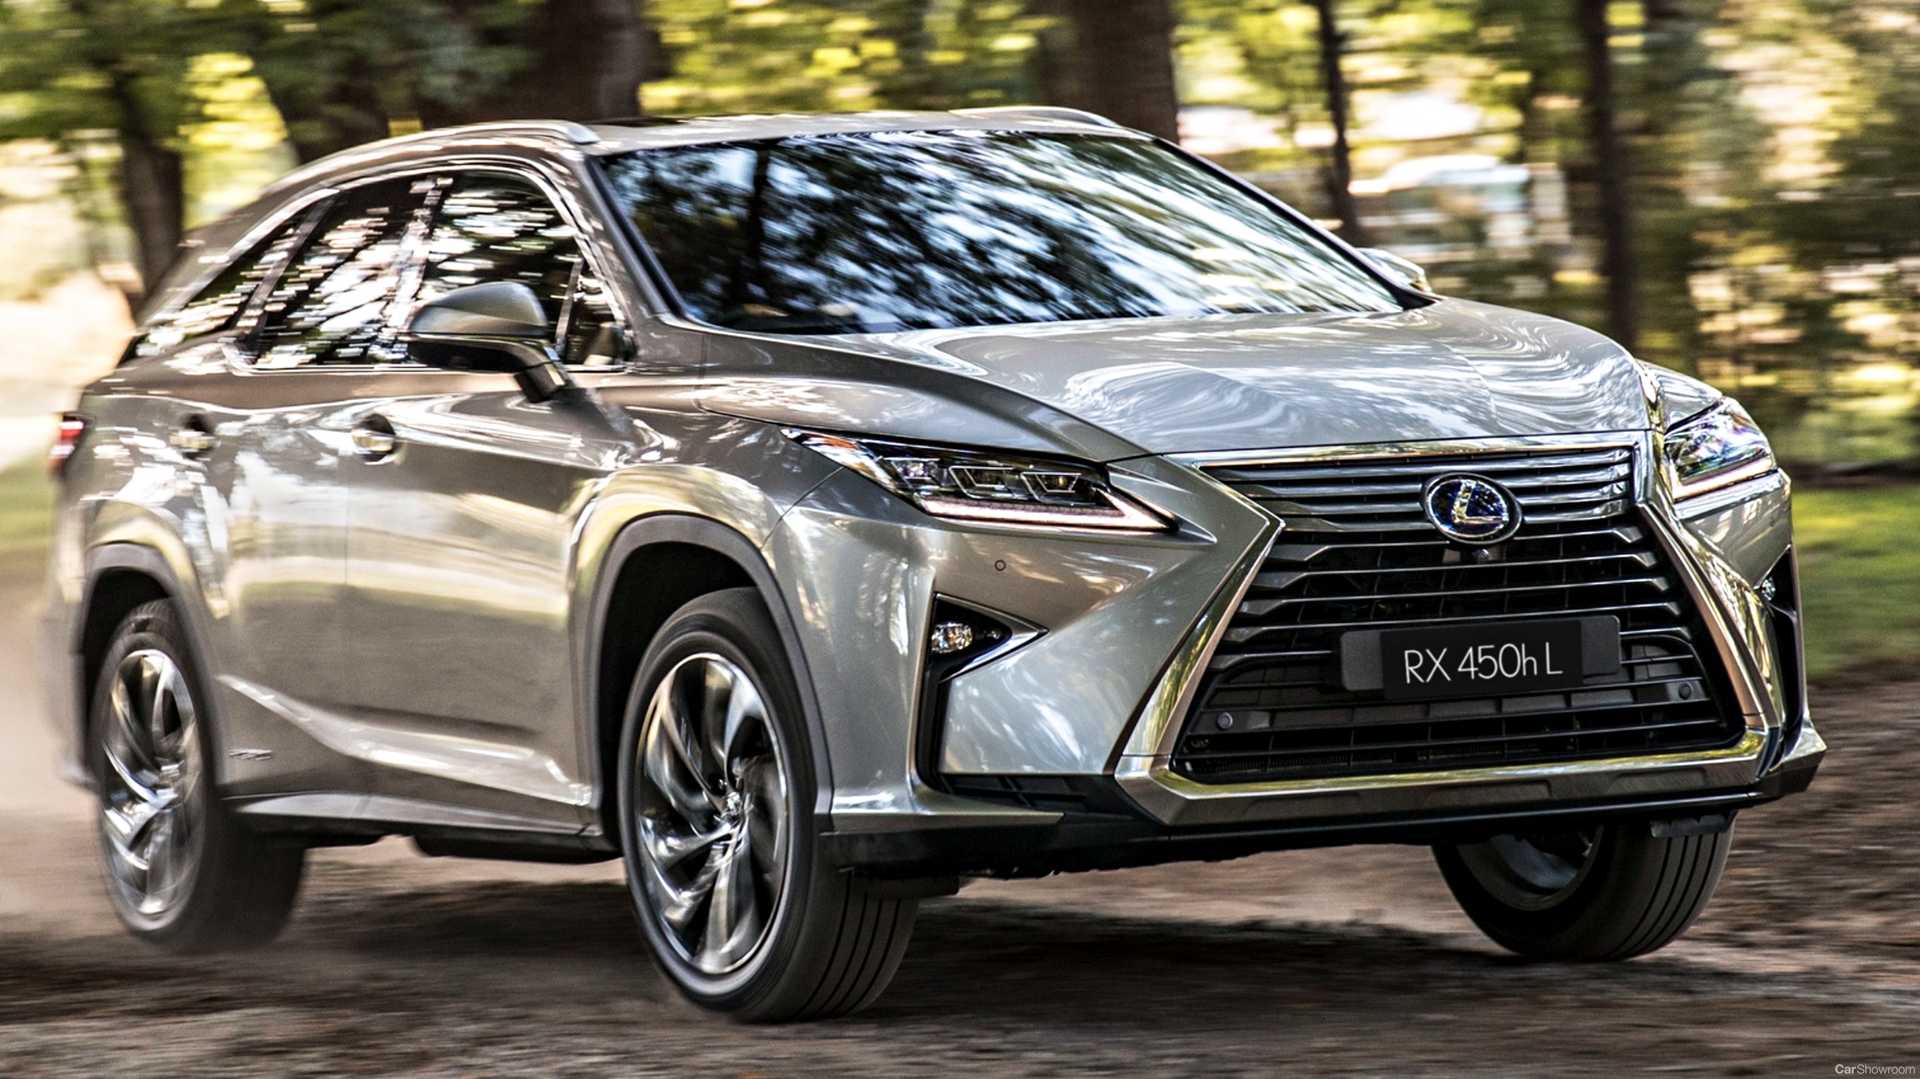 A Mission of LUV Driving the 2018 Lexus RX 450hL and